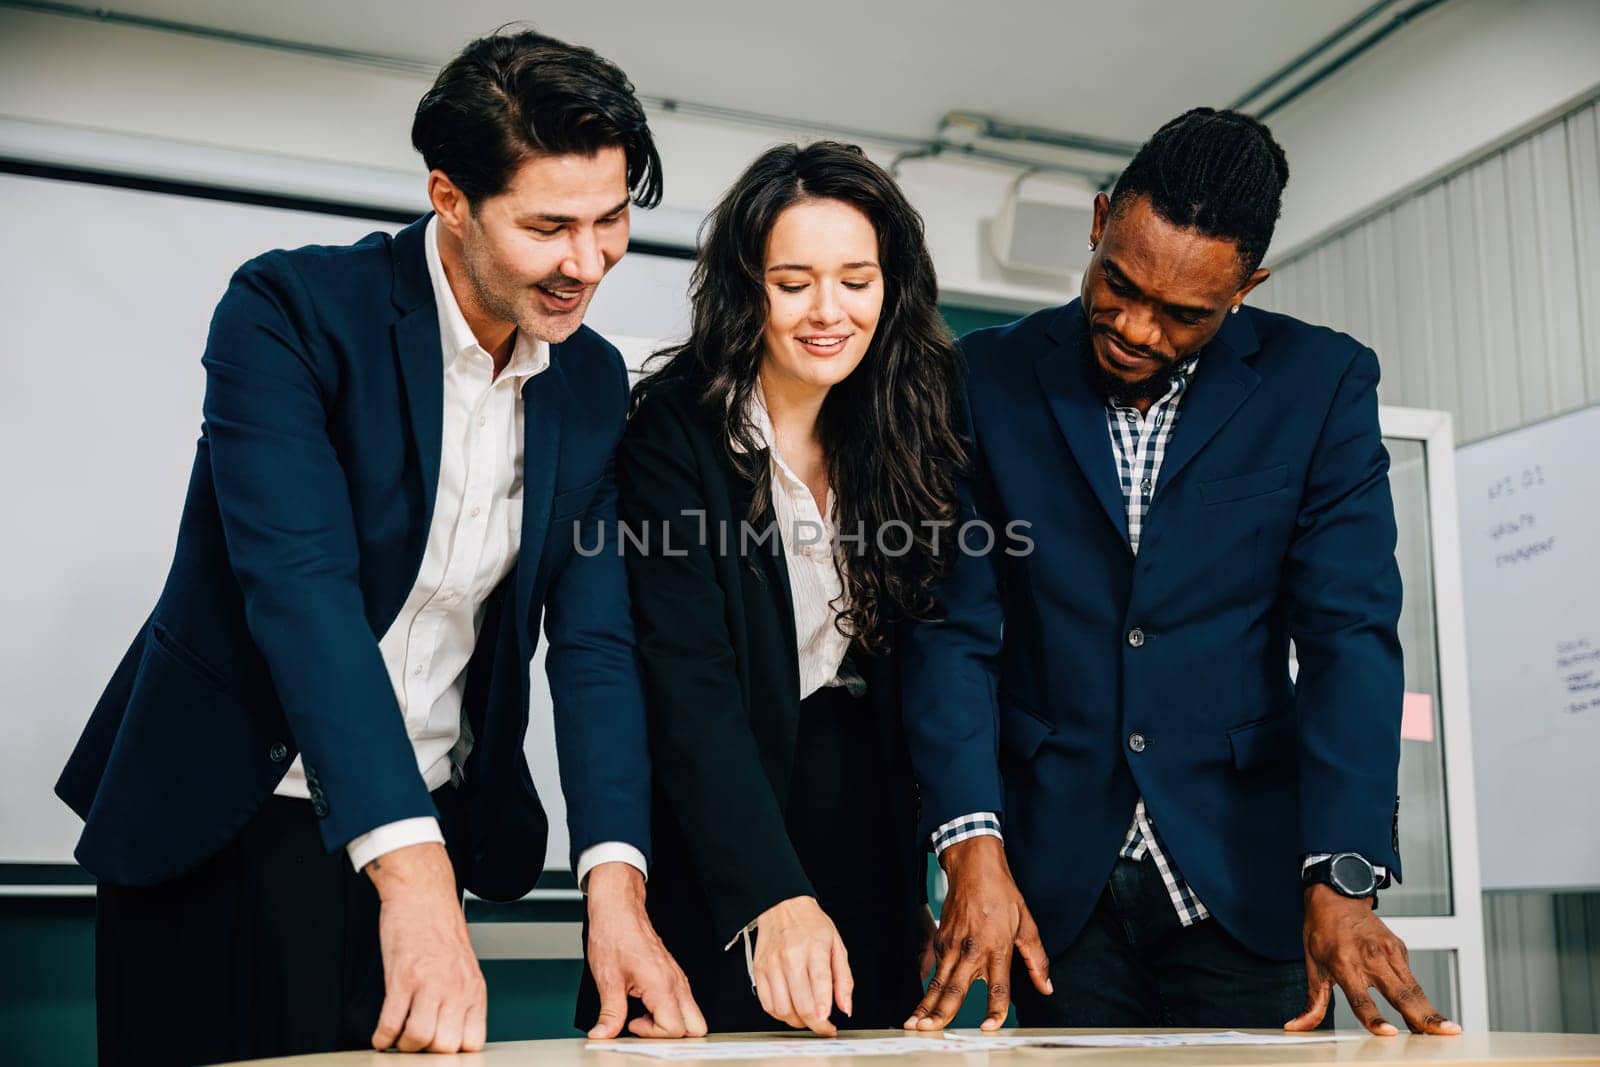 At a conference room desk, business colleagues stand, actively discussing and planning. Teamwork, diversity, and leadership are evident in this successful gathering.